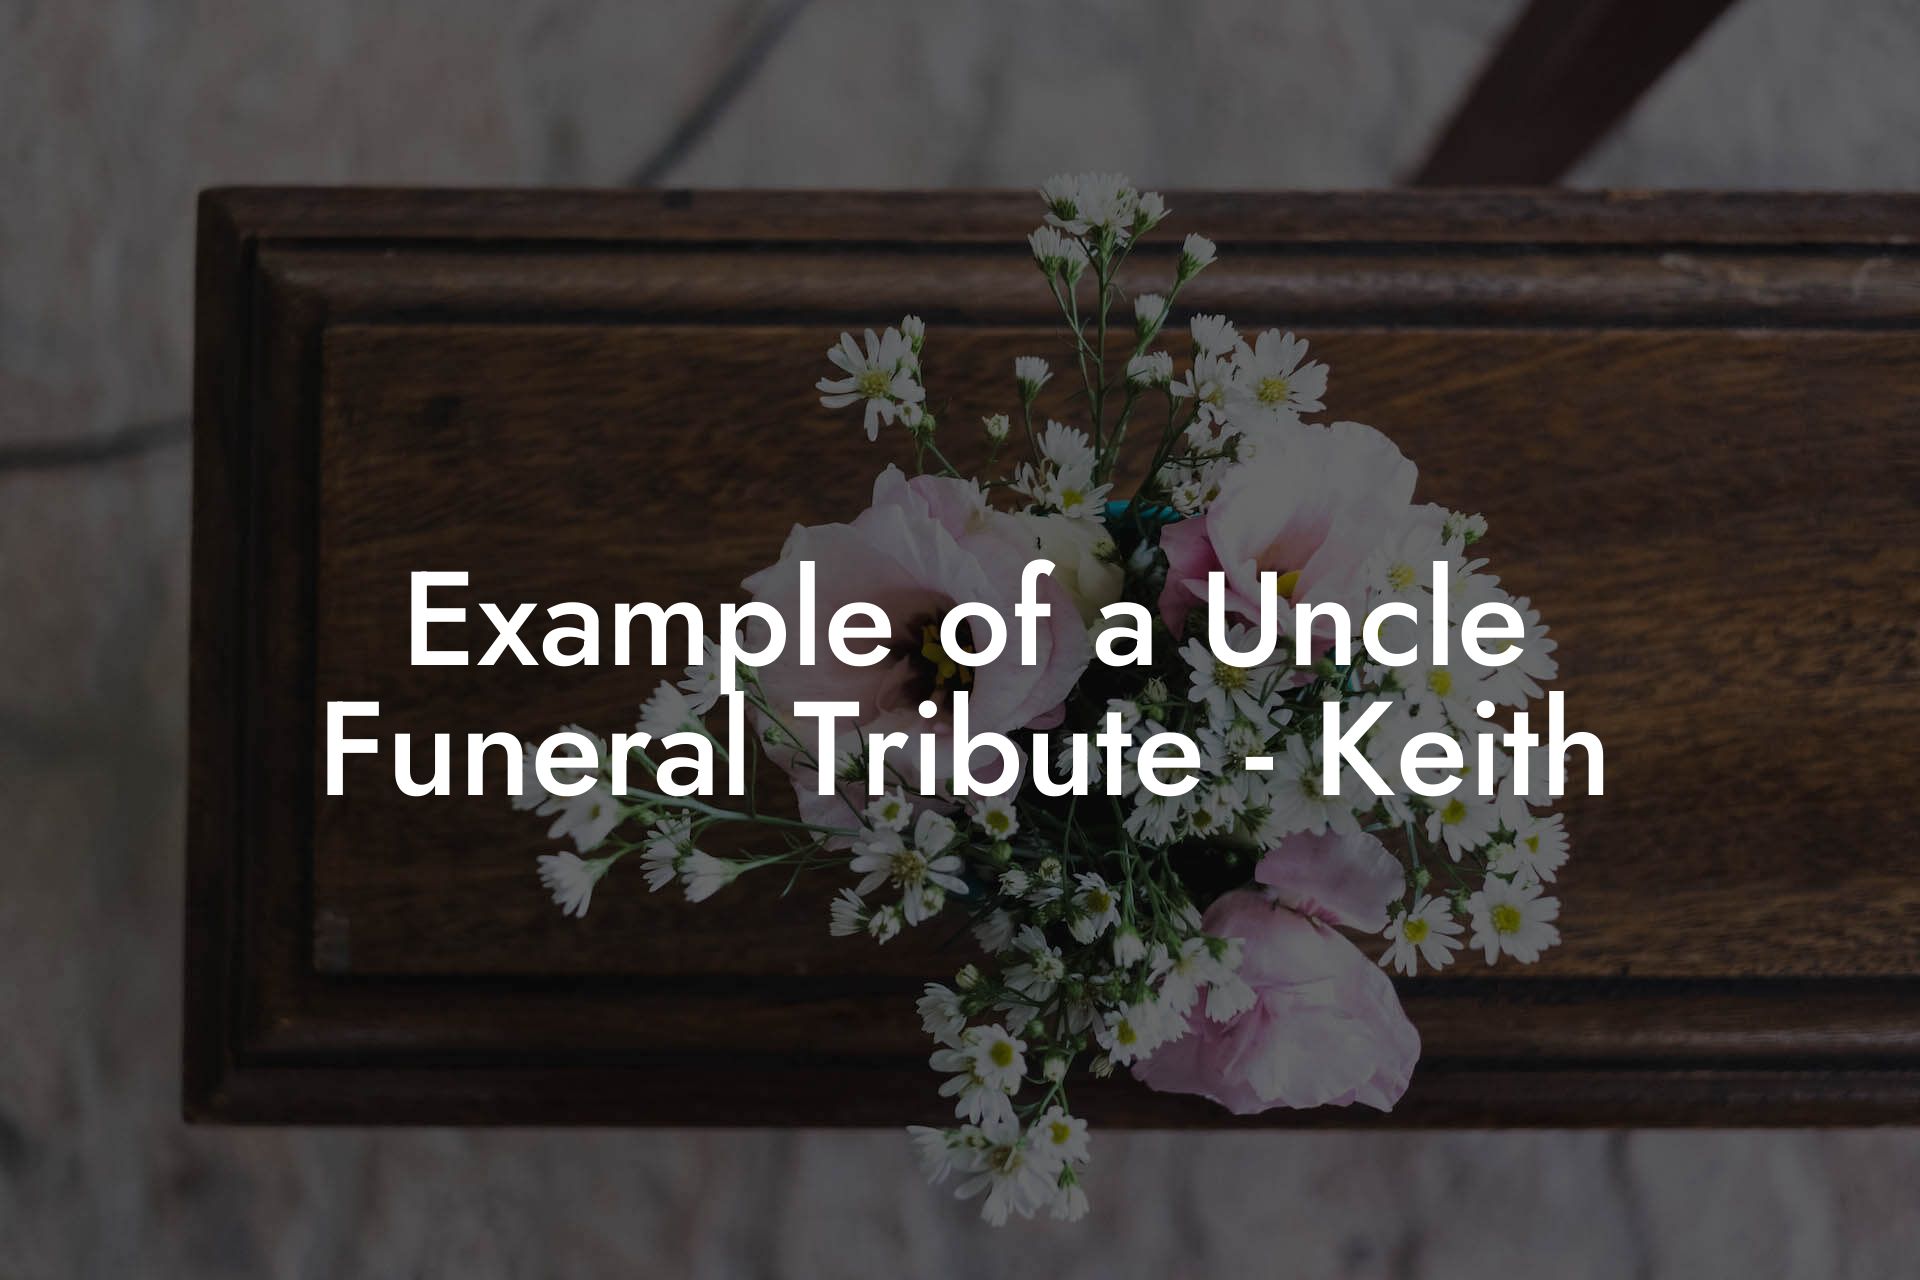 Example of a Uncle Funeral Tribute - Keith